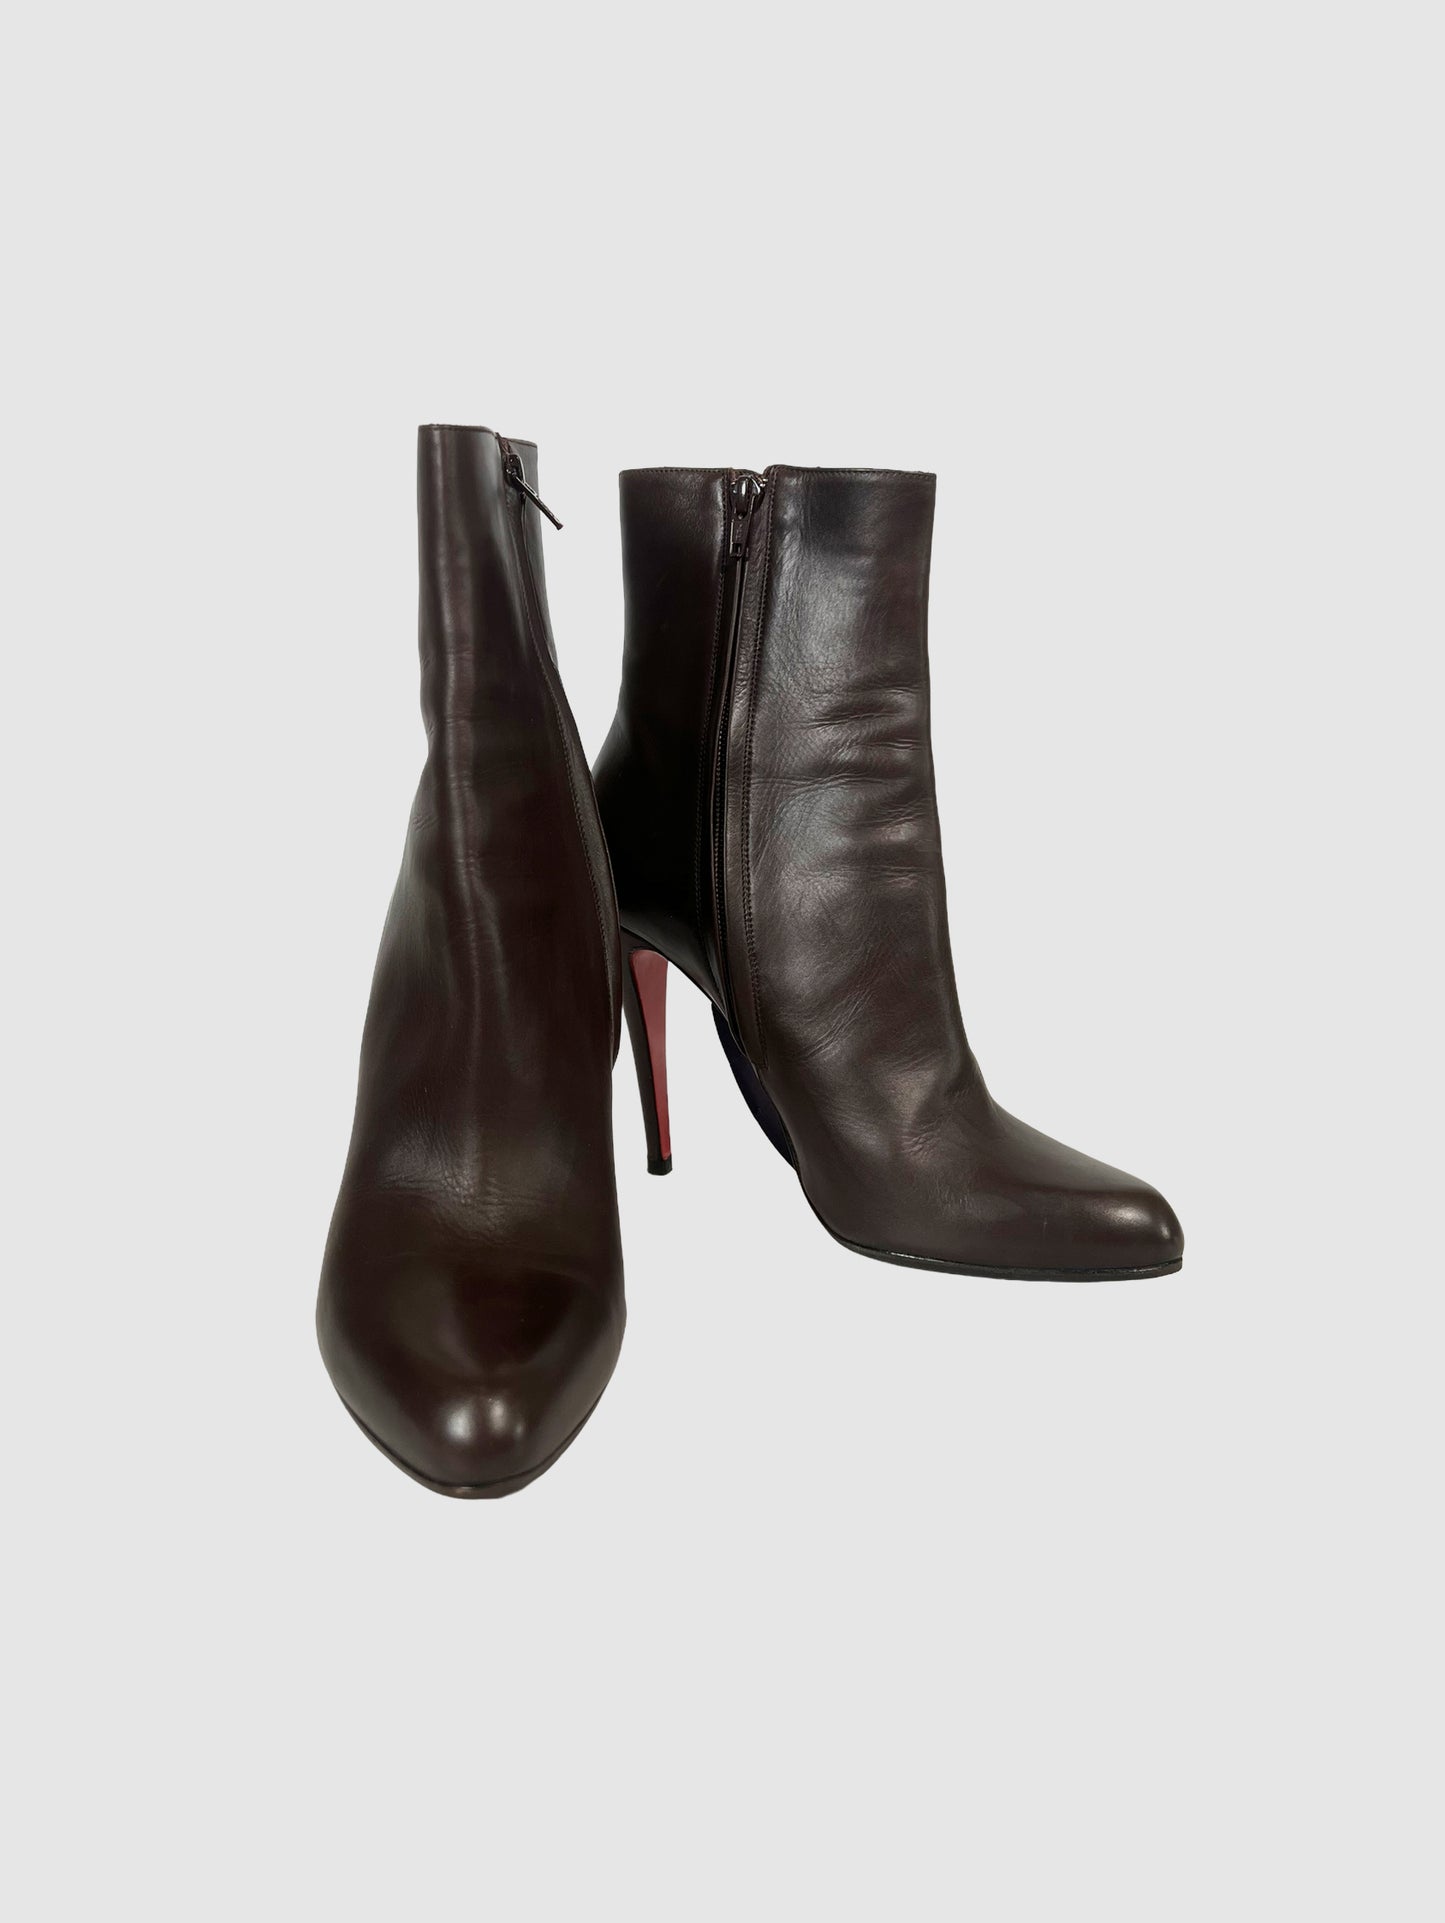 Christian Louboutin So Kate Brown Boots - Size 40